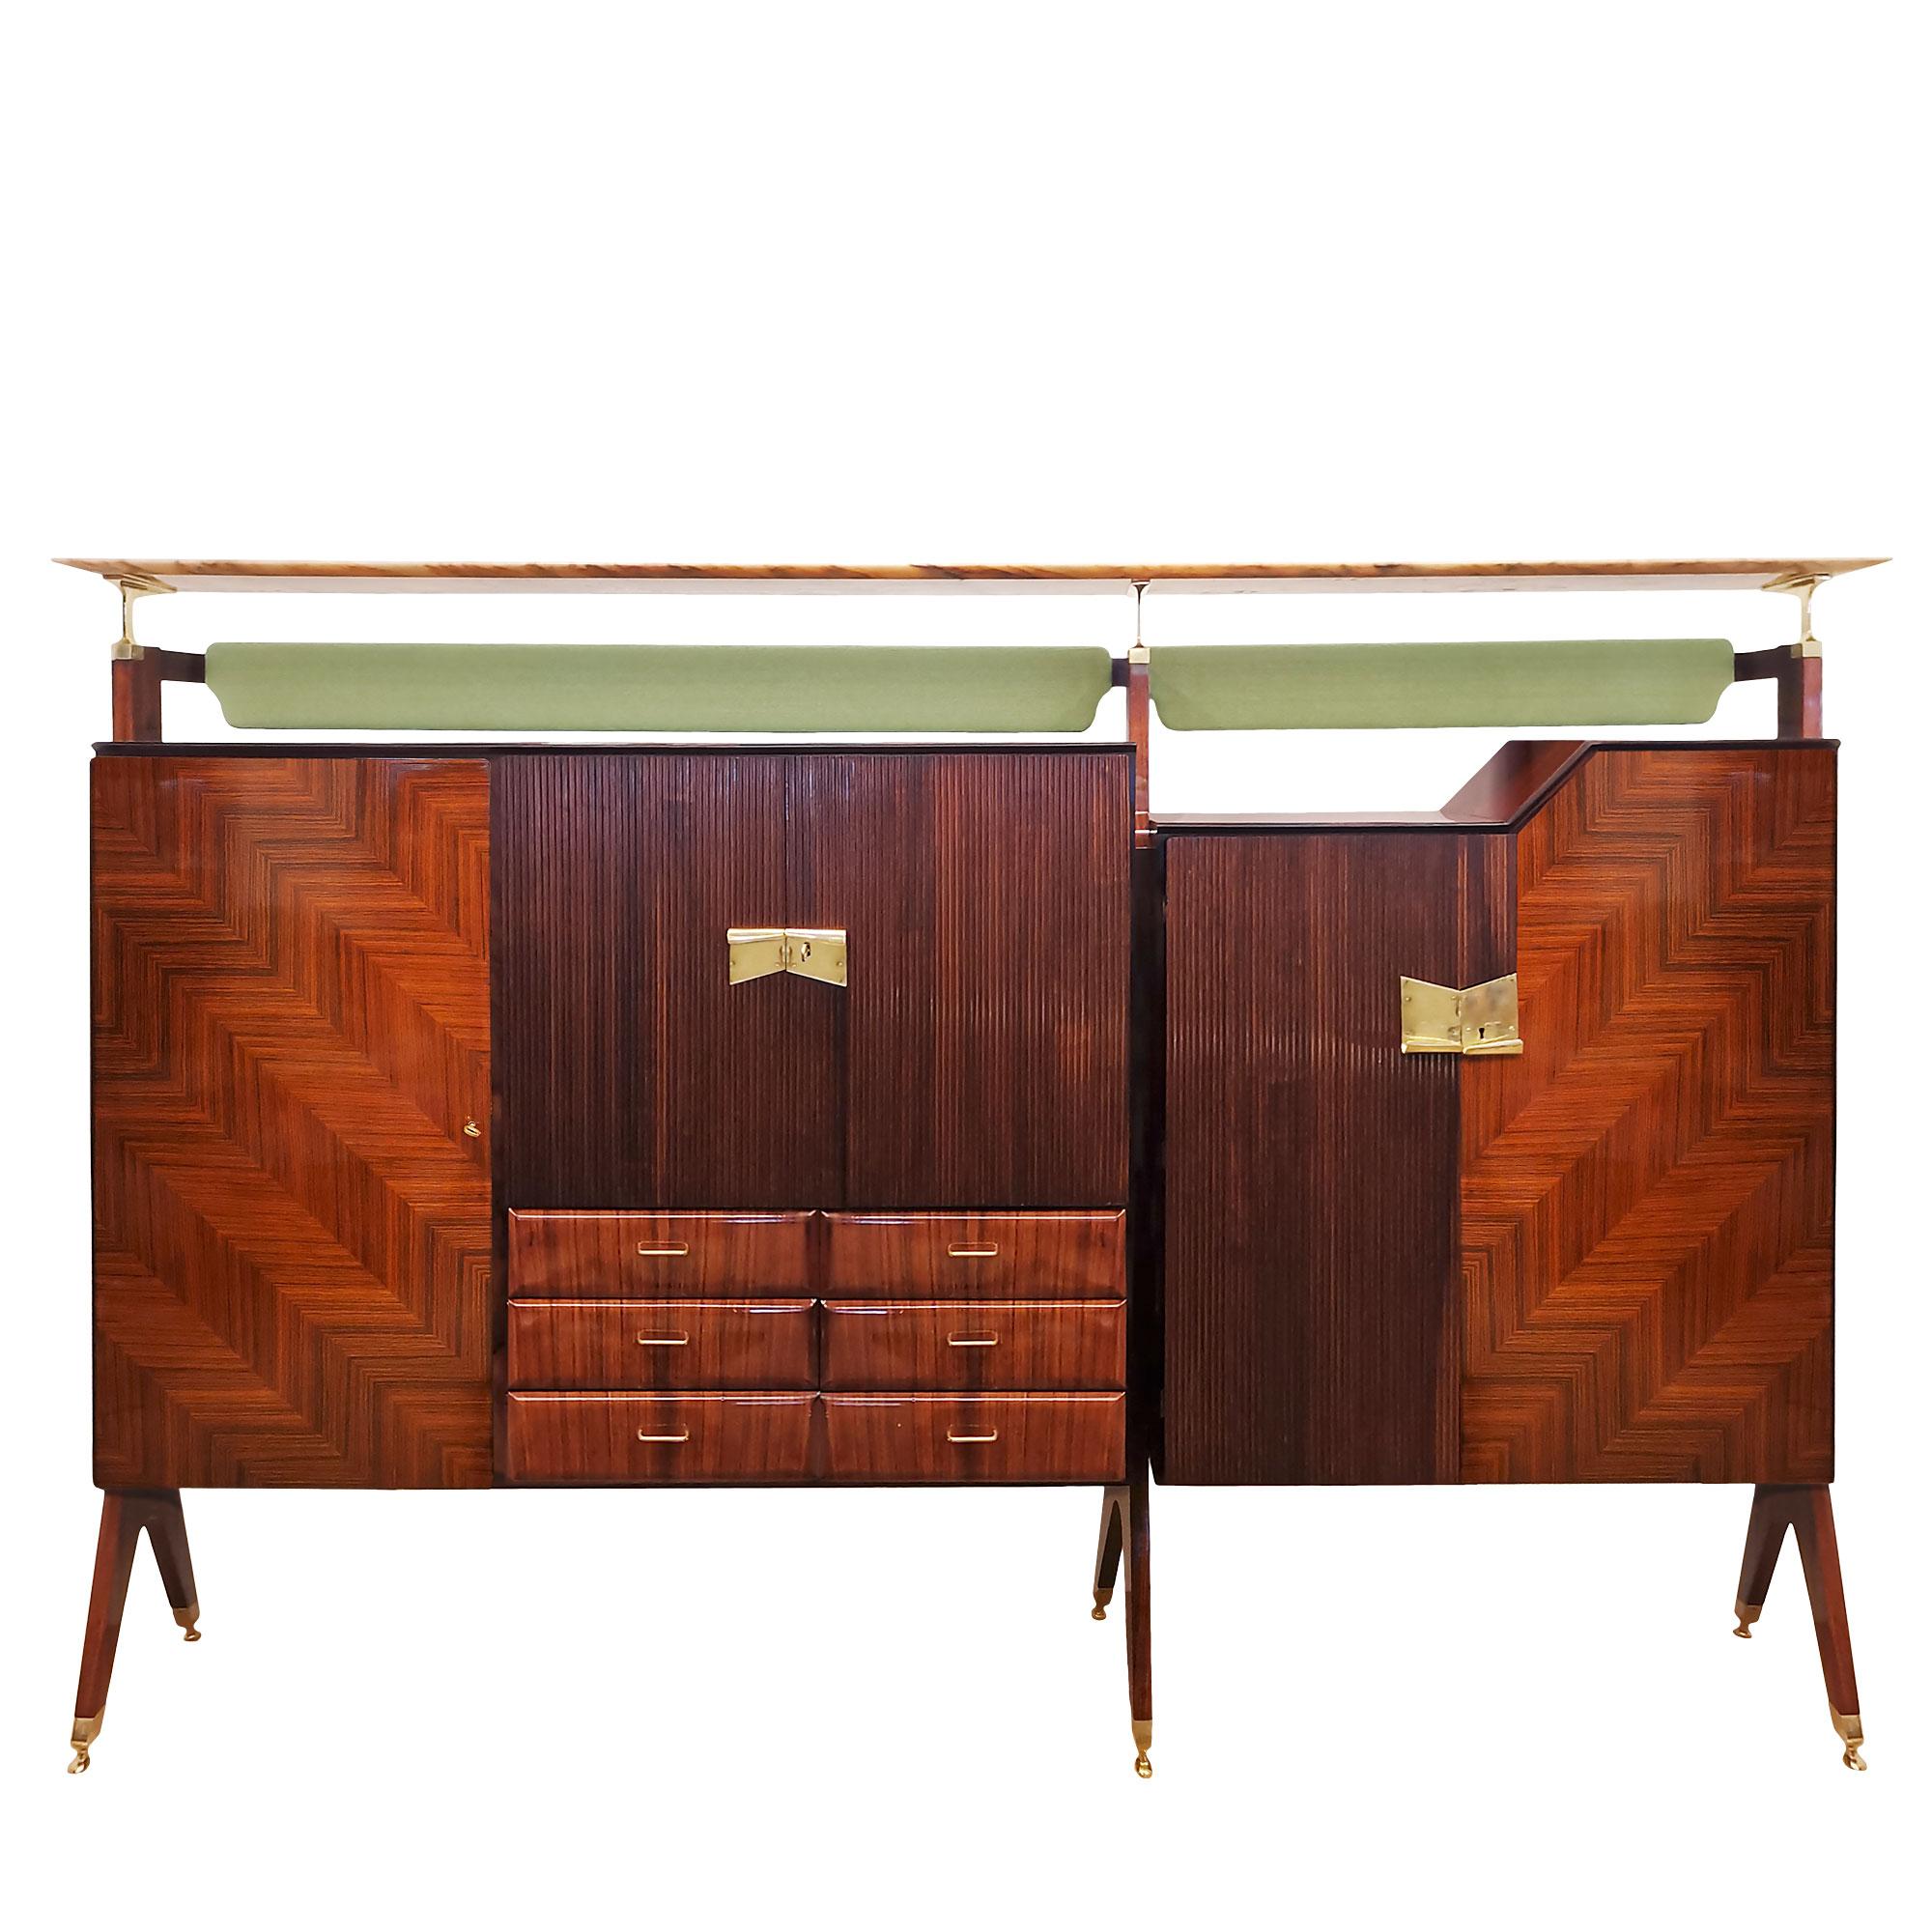 Large removable multi-purpose piece of furniture in solid wood veneered with walnut, walnut marquetry in “chevrons” pattern; three doors in “grissinis” of solid sapele; illuminated mirrored bar.

Interiors in sycamore and ebony mouldings; feet,